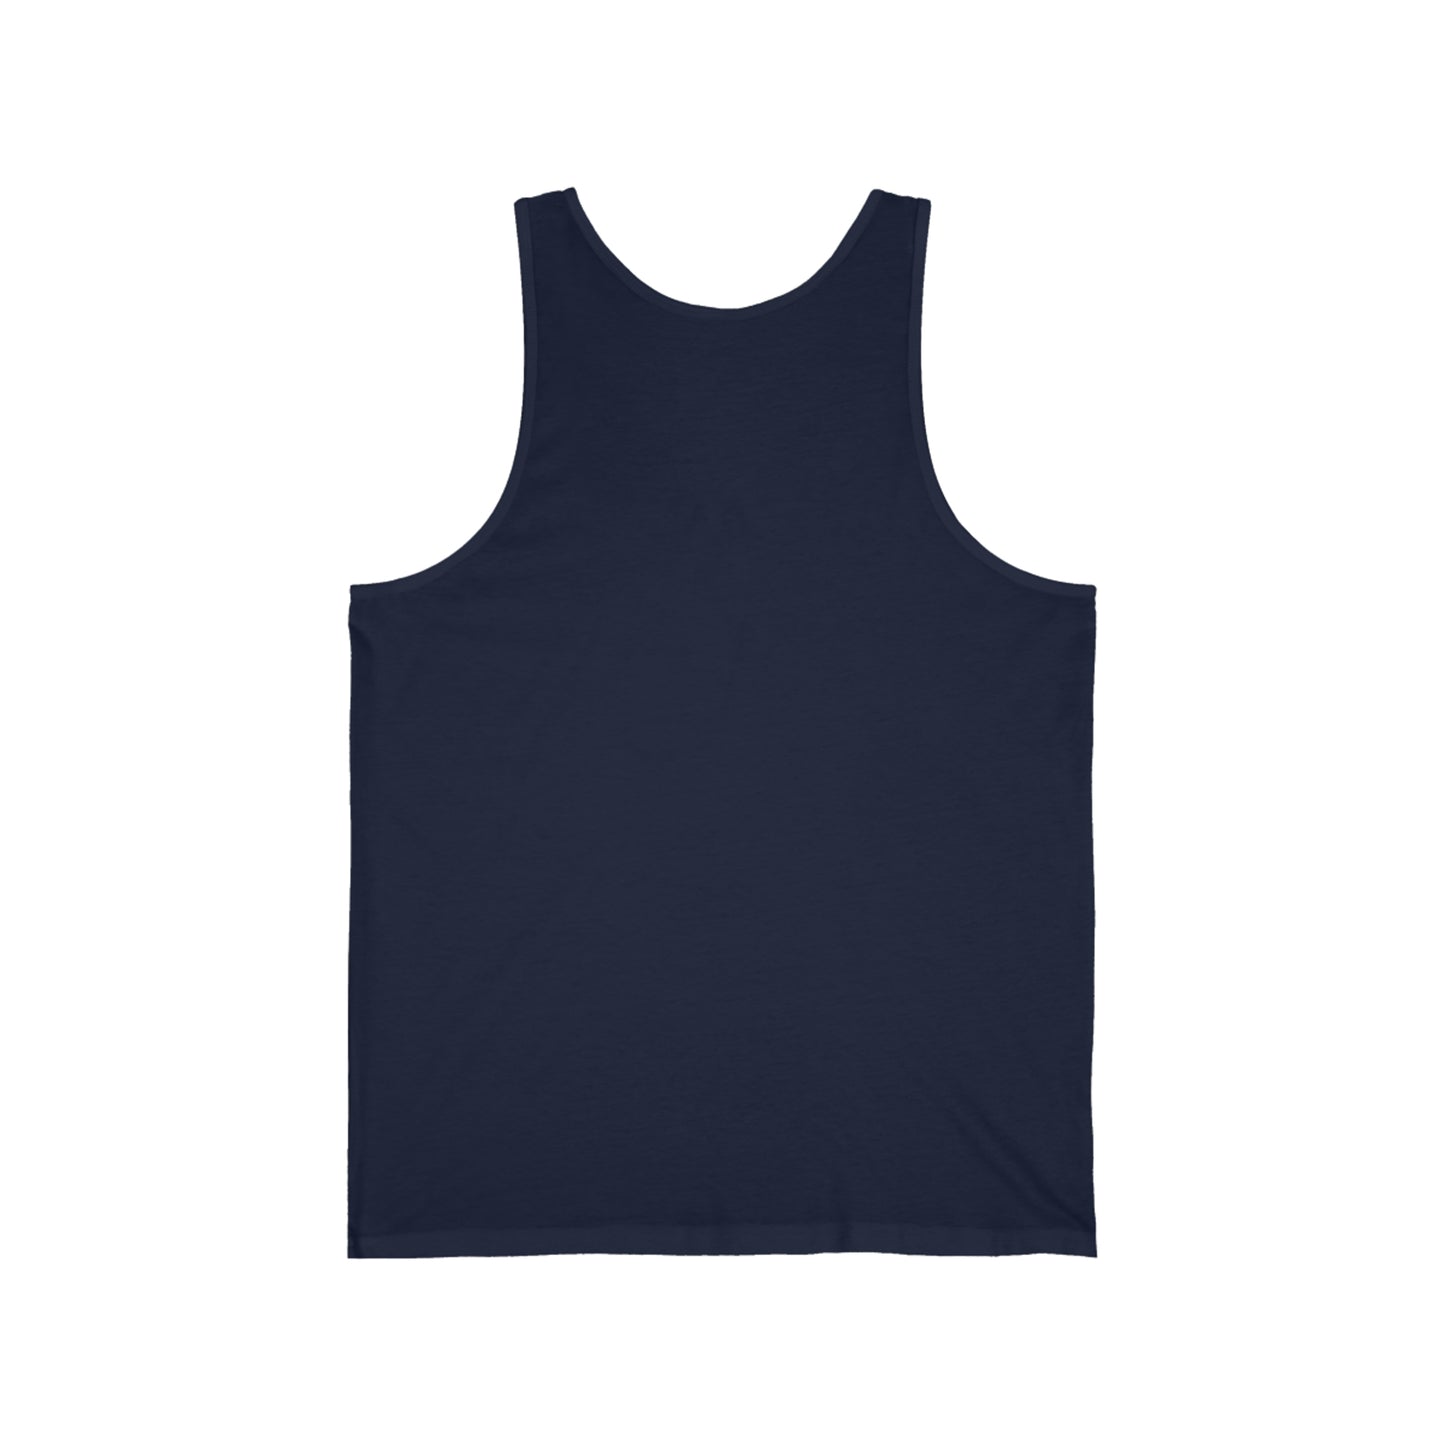 Taiwanese Roots Design 3: Tank Top